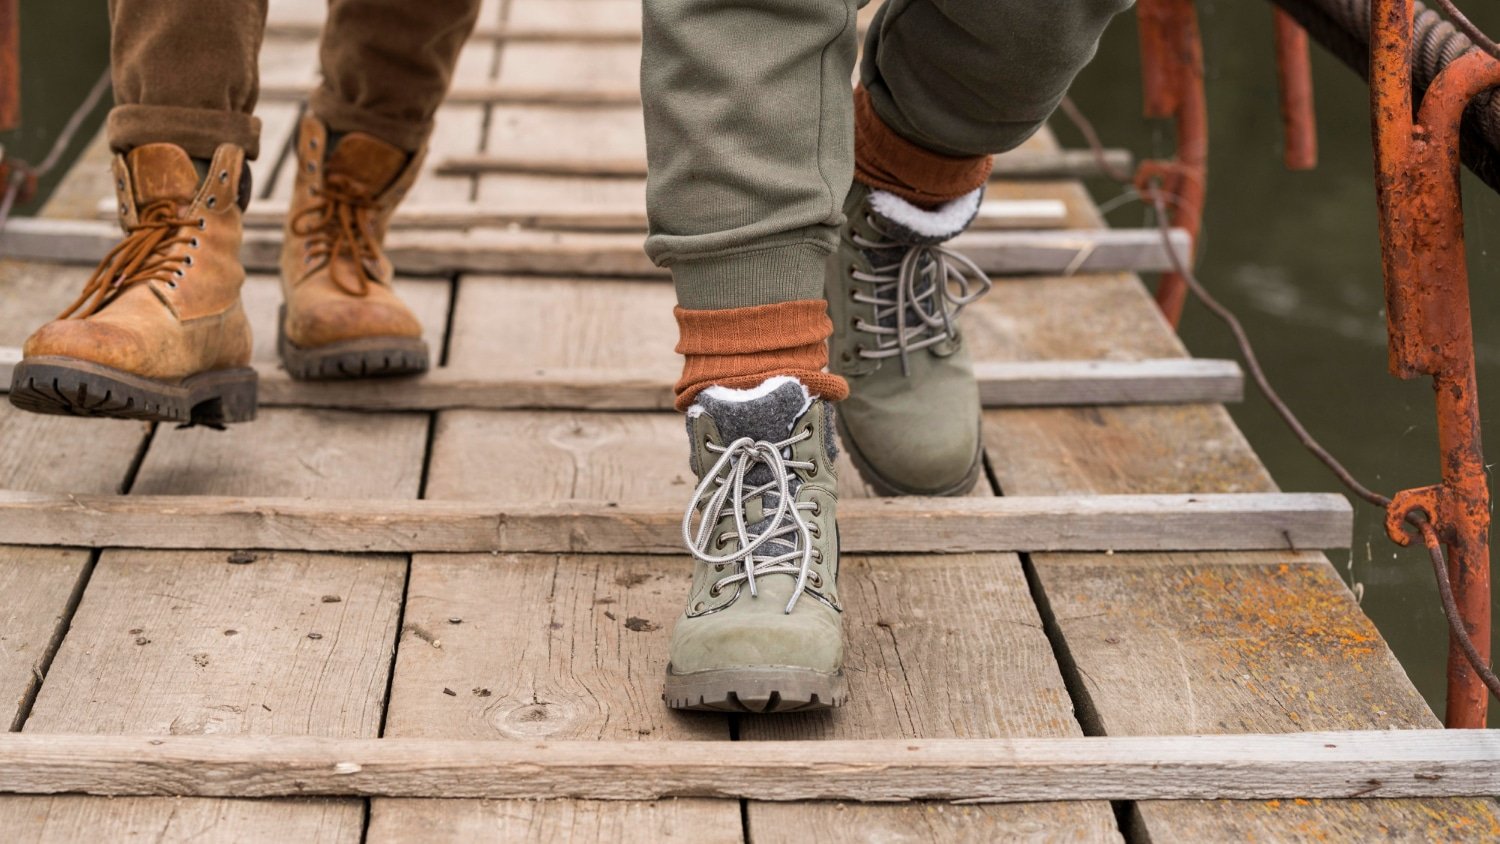 Step Into Durability With CAT Footwear’s Rugged Work Boots